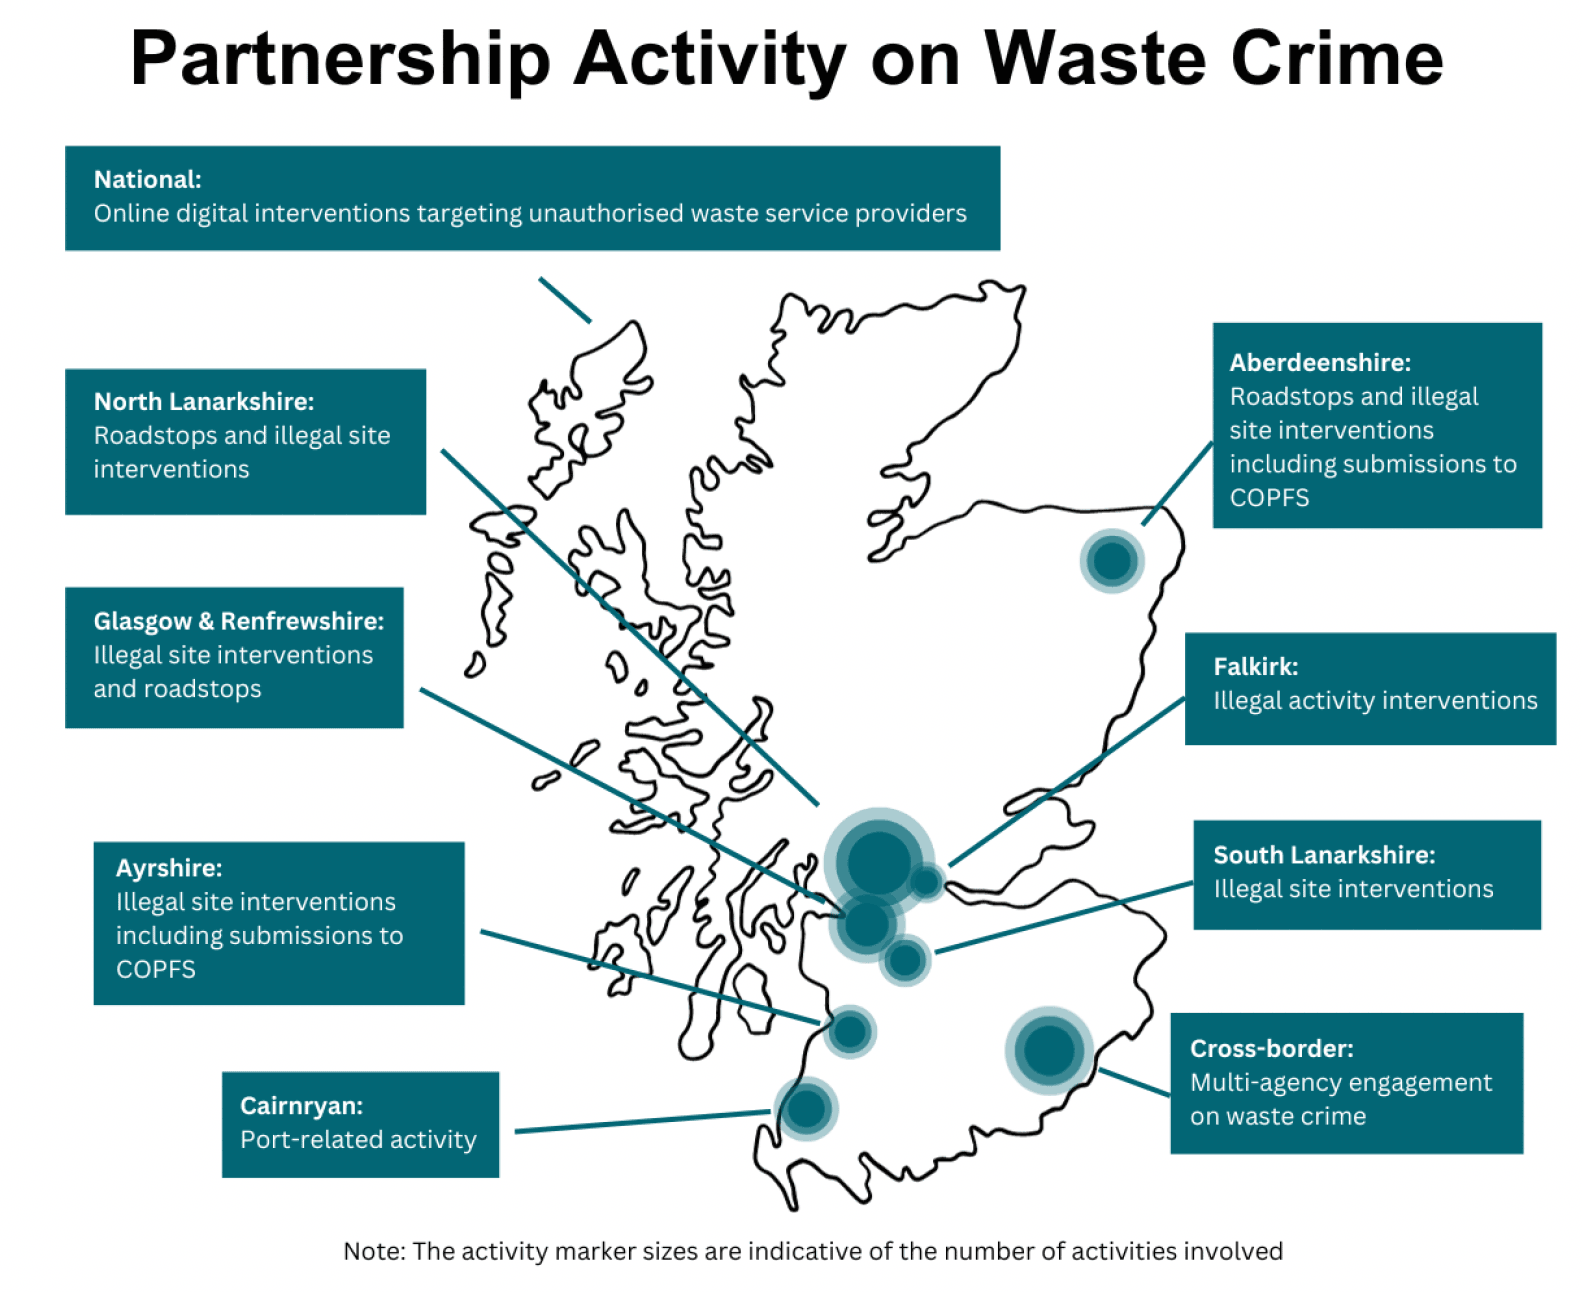 Heat map of areas in Scotland that have illegal waste crime sites linked to serious organised crime